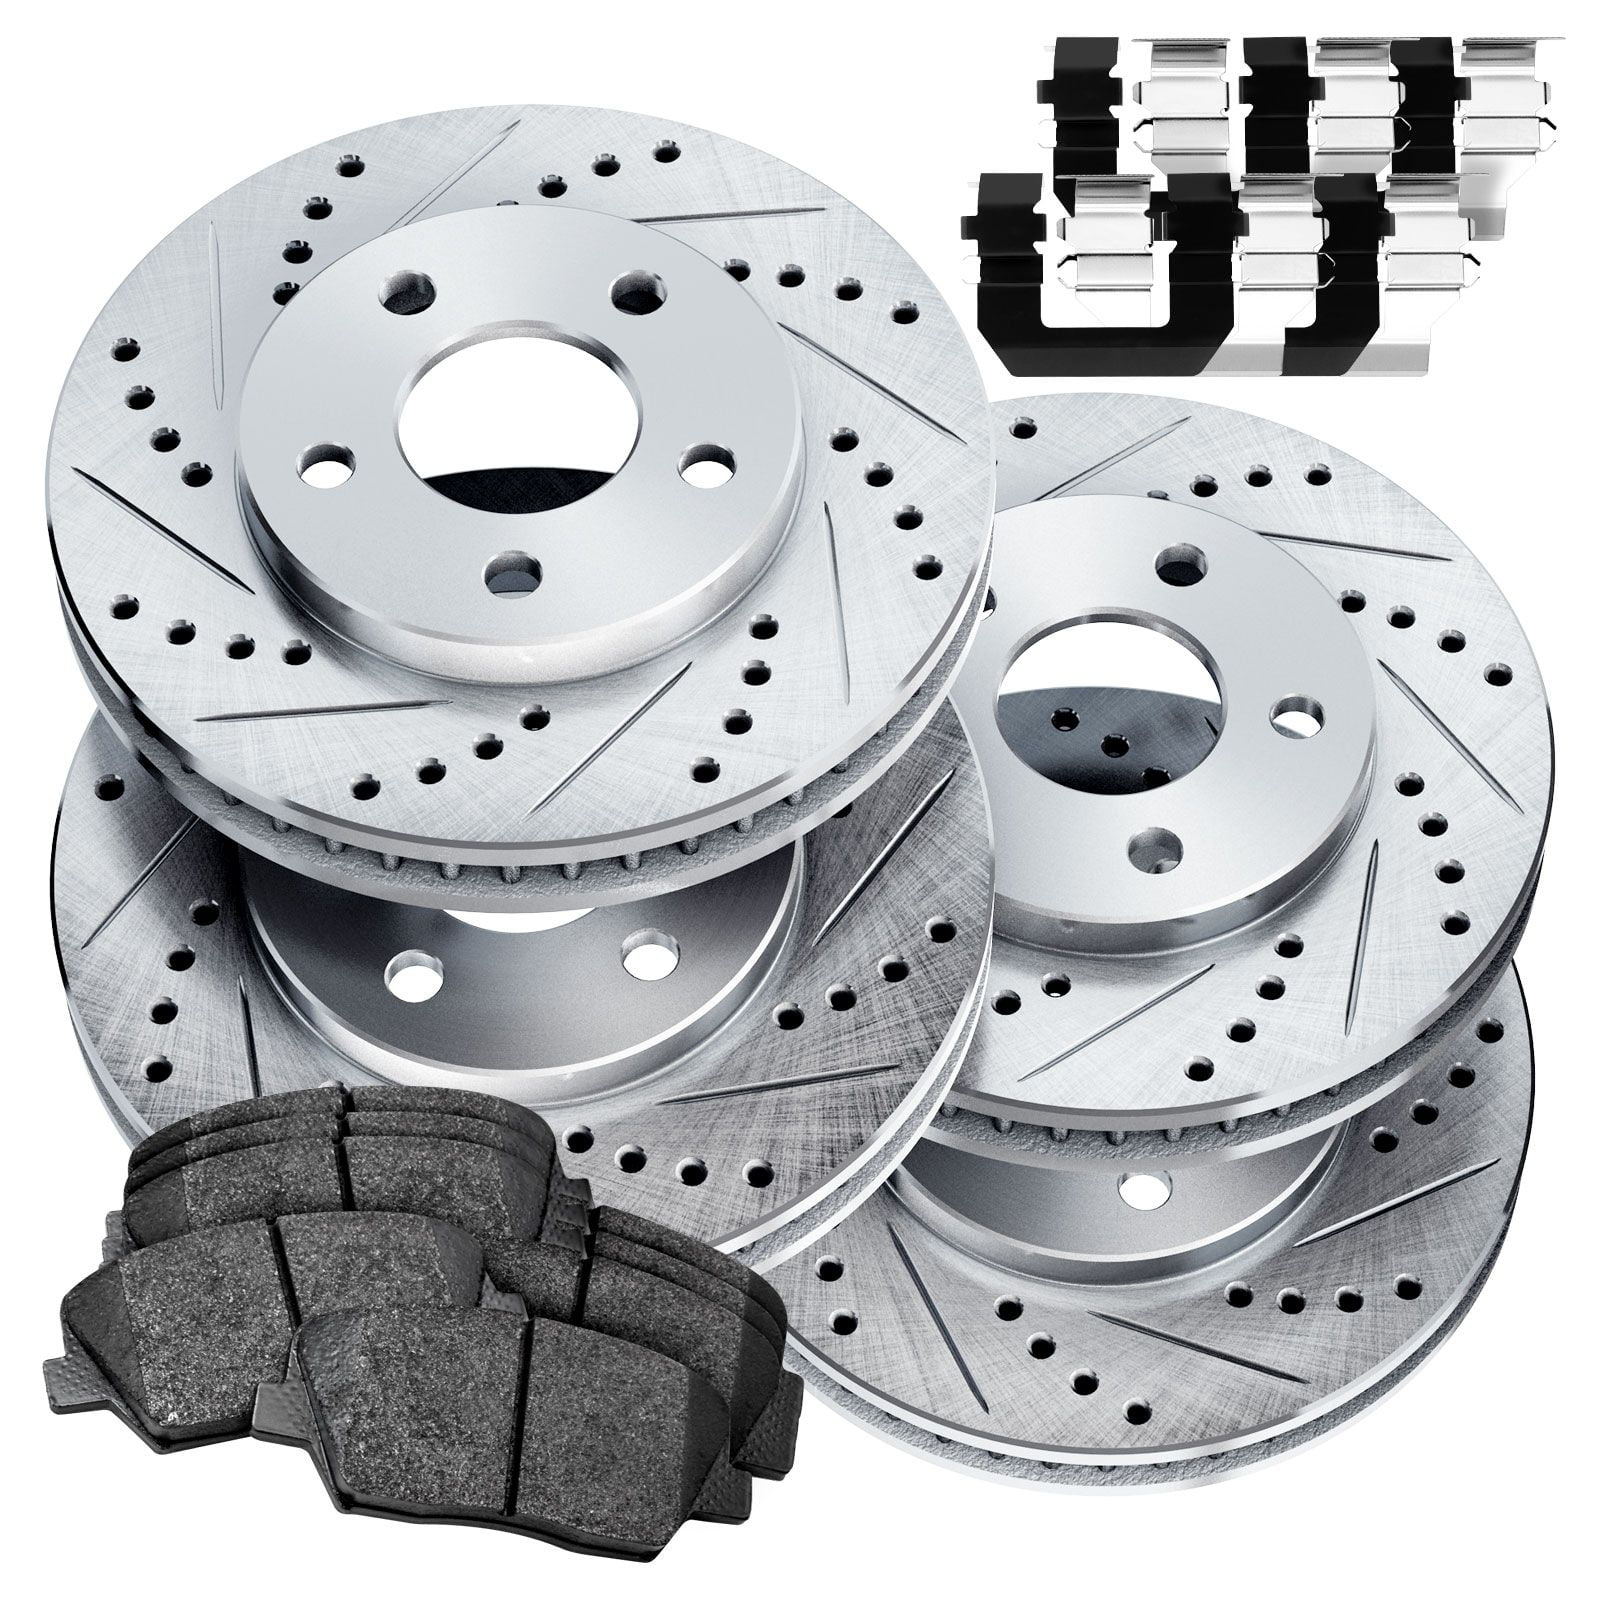 321mm Front Brake Rotors & Ceramic Pads for 2014 2015 2016 Chevy Impala